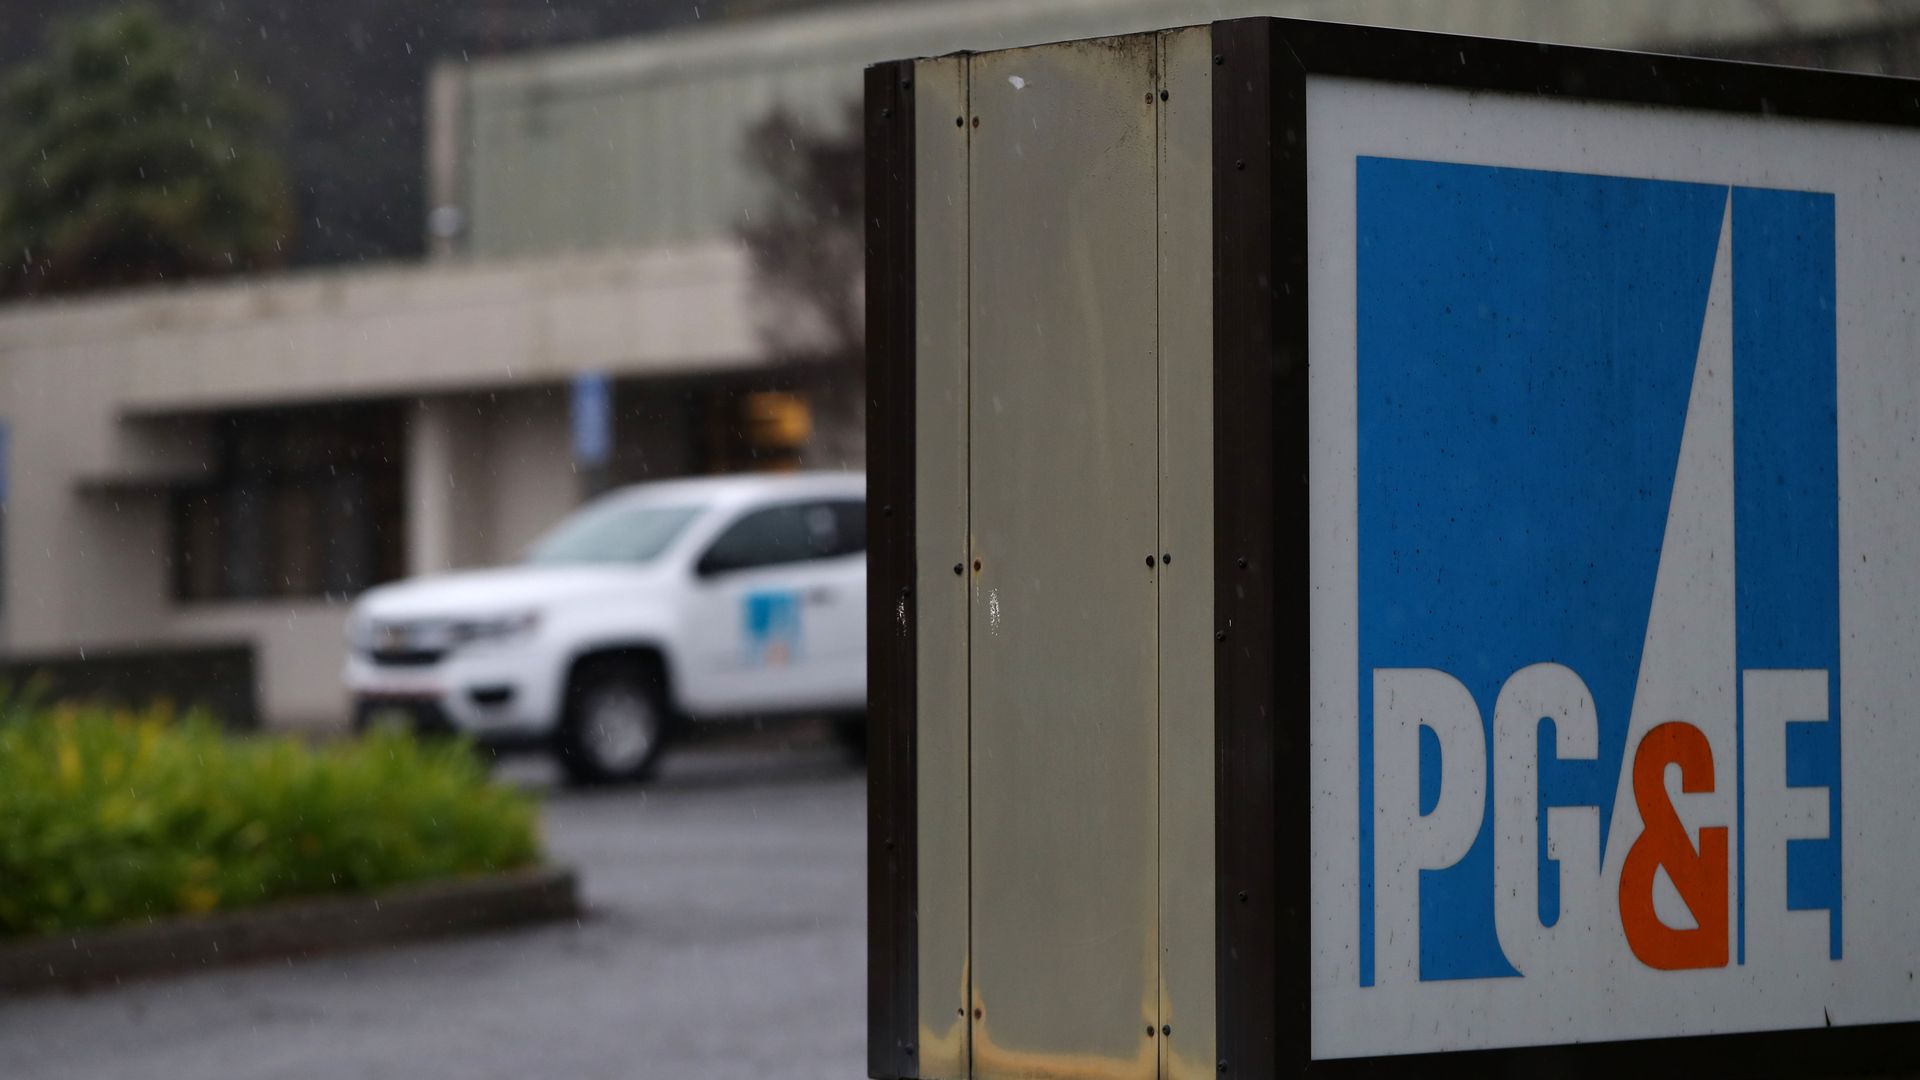 The Pacific Gas & Electric (PG&E) logo is displayed on a sign in front of the PG&E Service Center on January 15, 2019 in San Rafael, California.